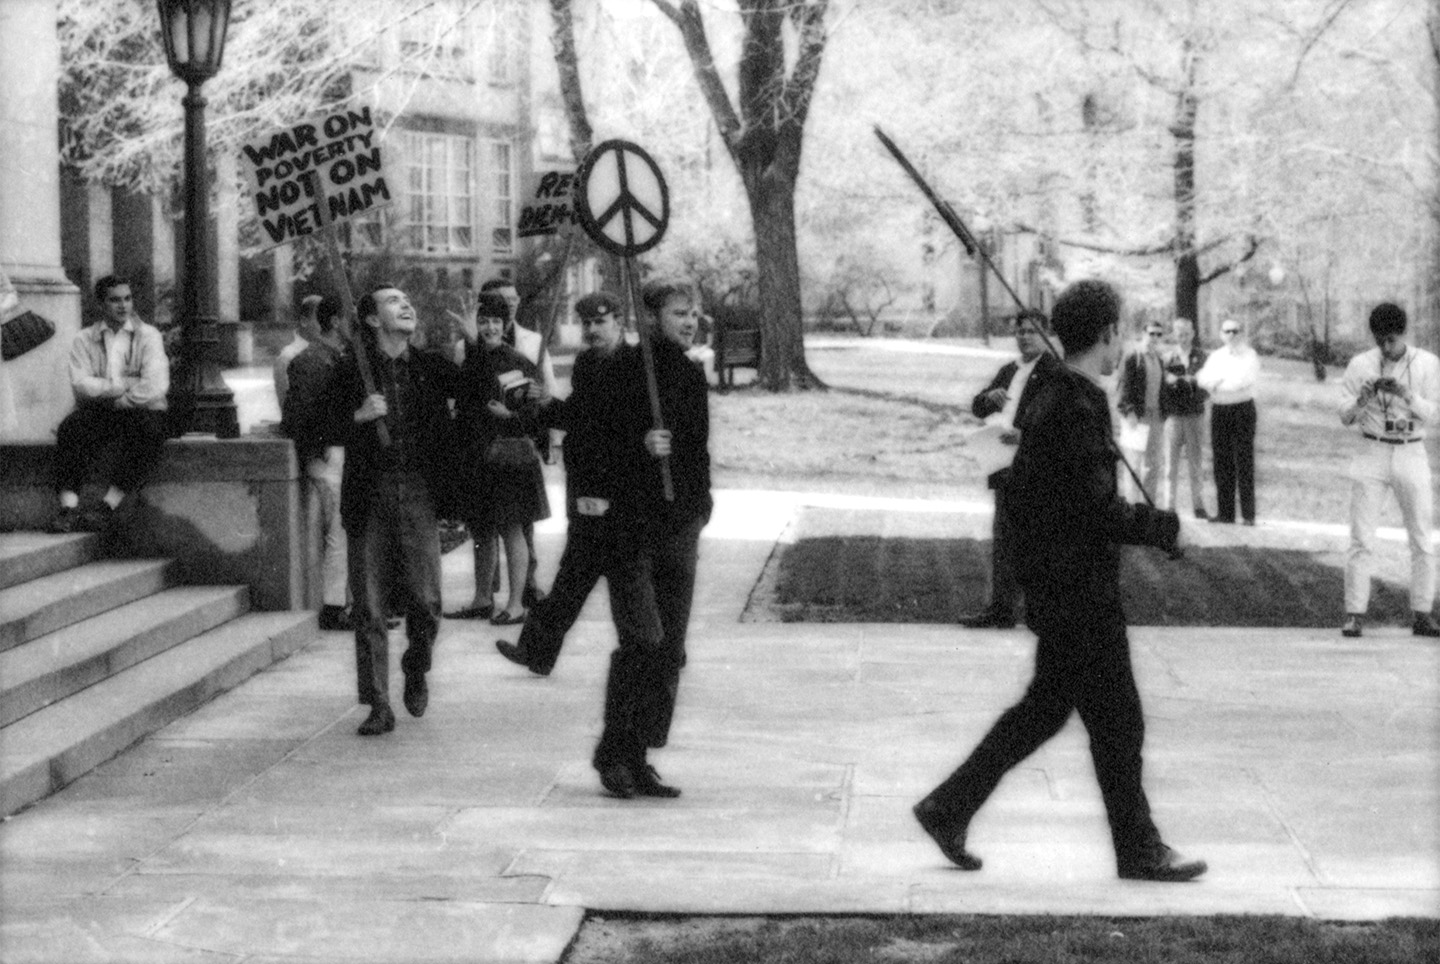 Student Peace Union members picket